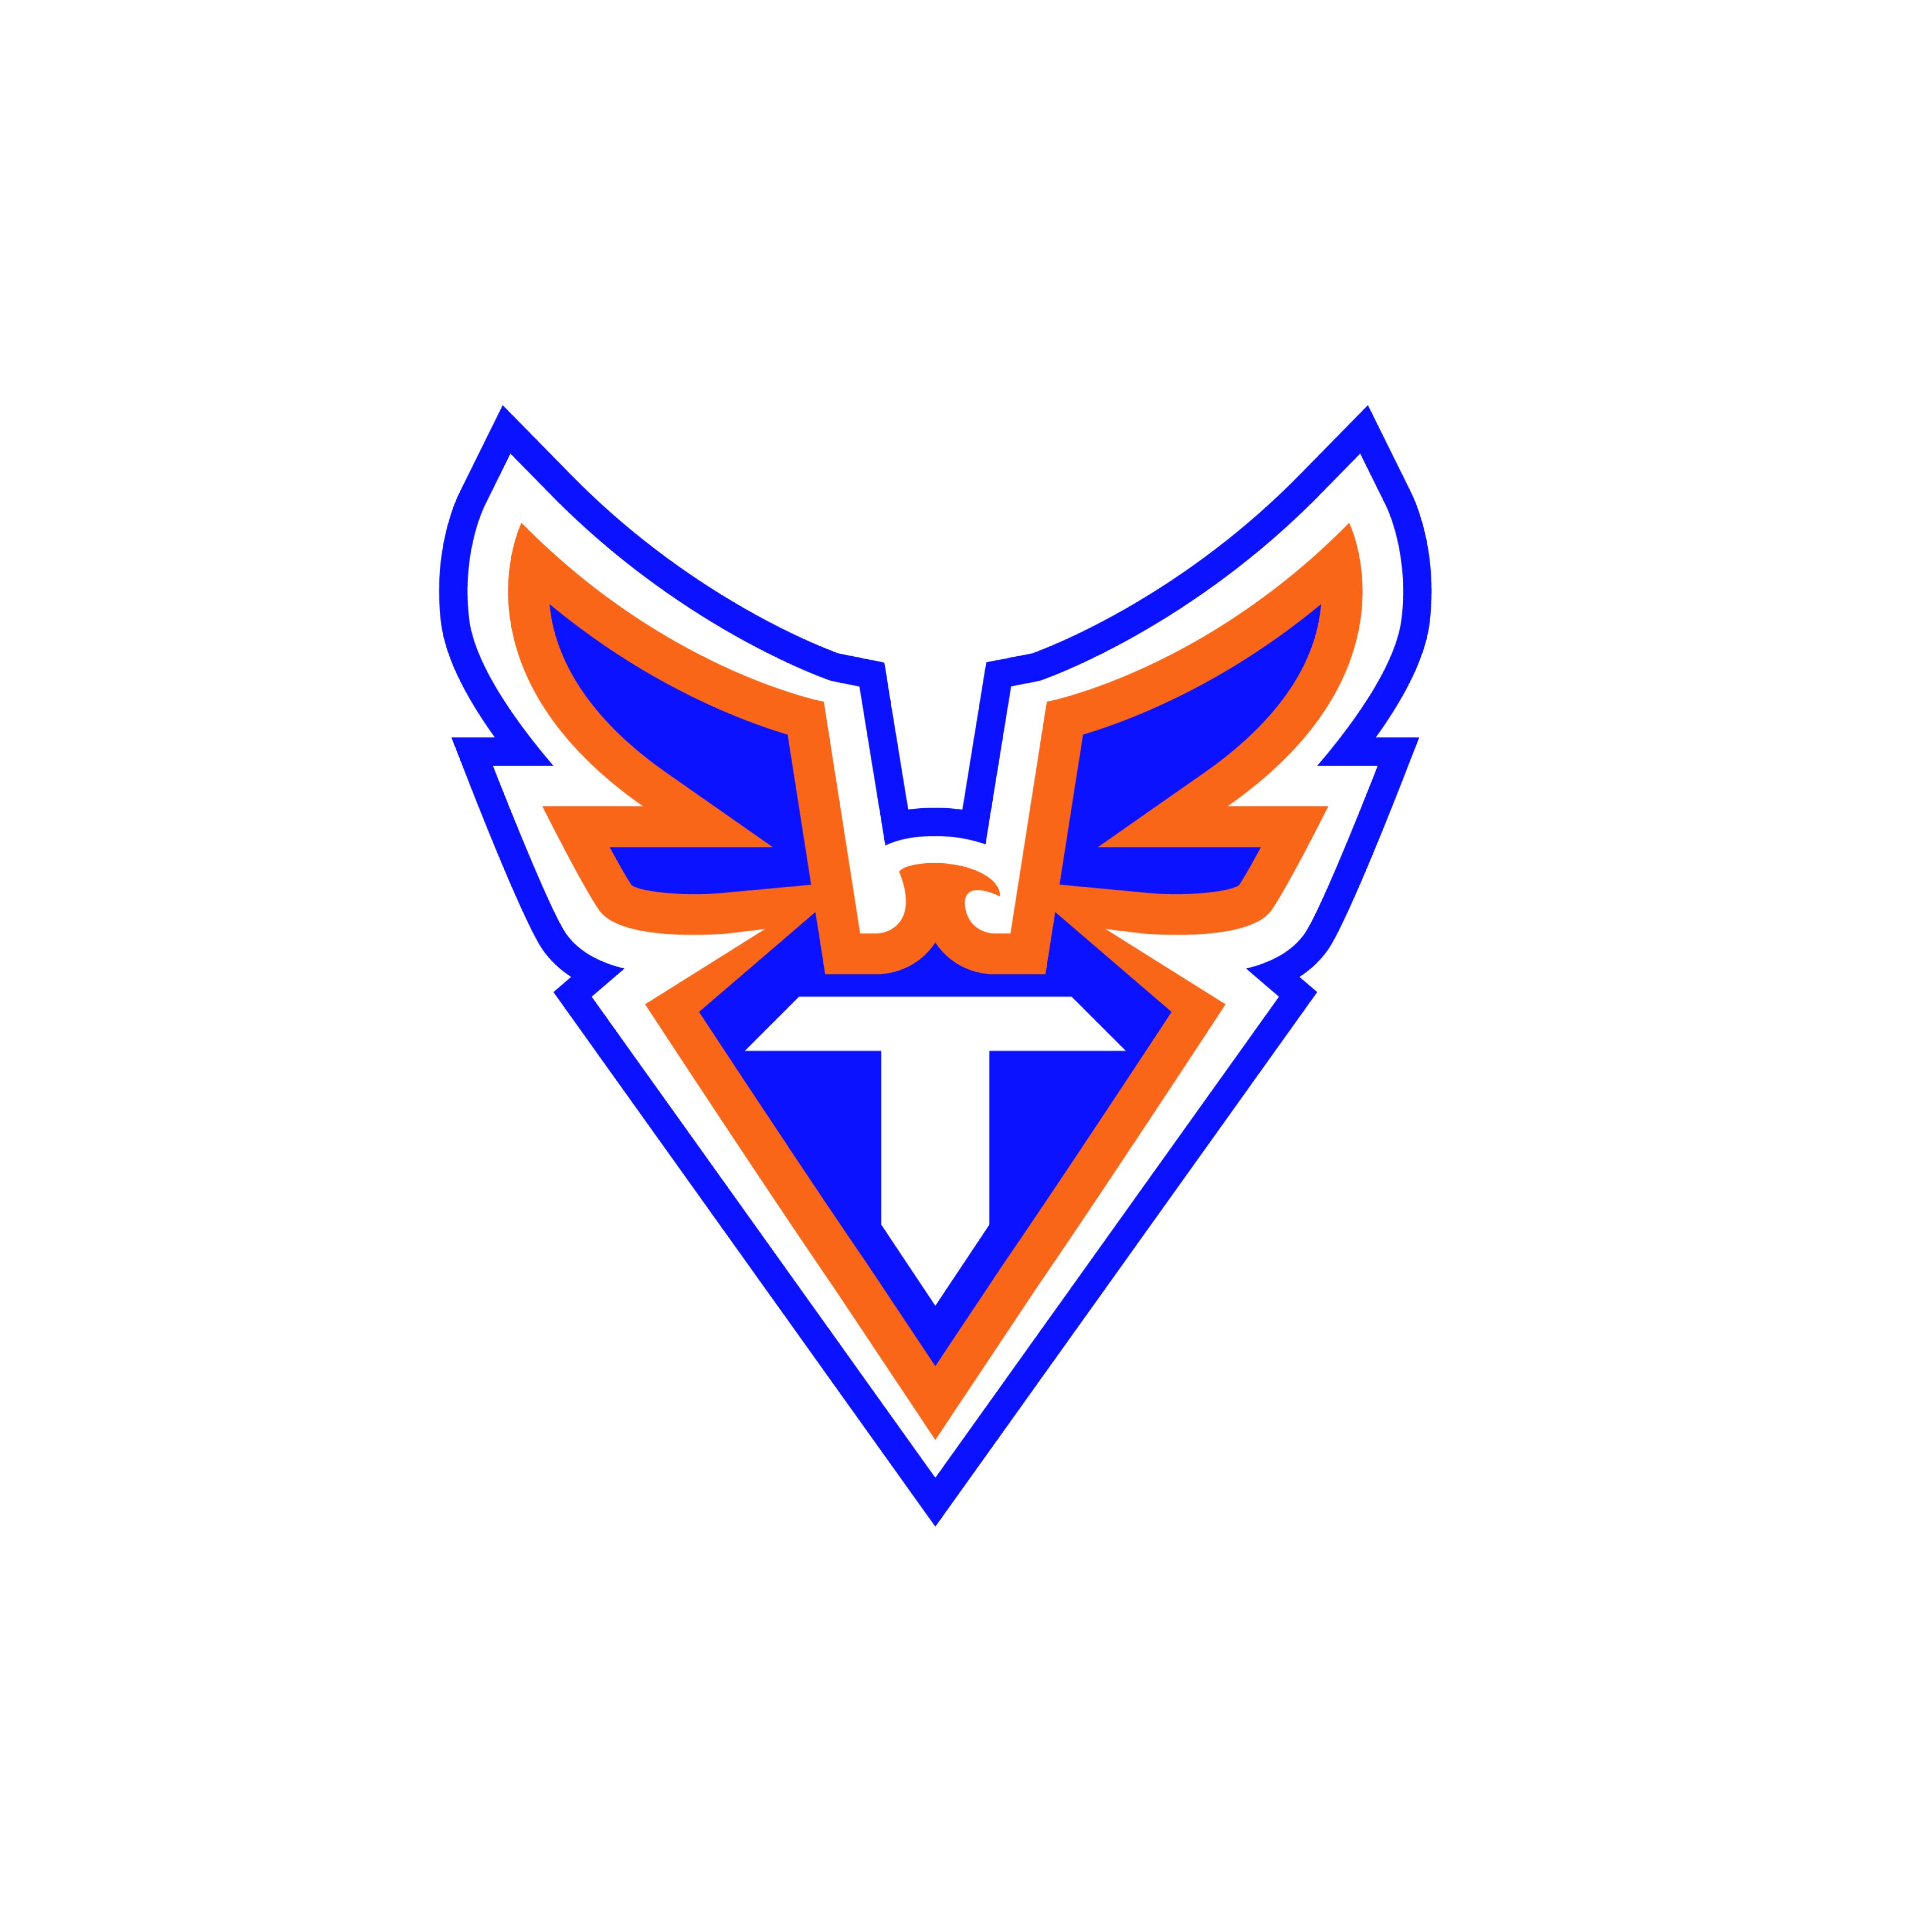 Thunderbird High School 02 logo design by logo designer DLR Group  for your inspiration and for the worlds largest logo competition